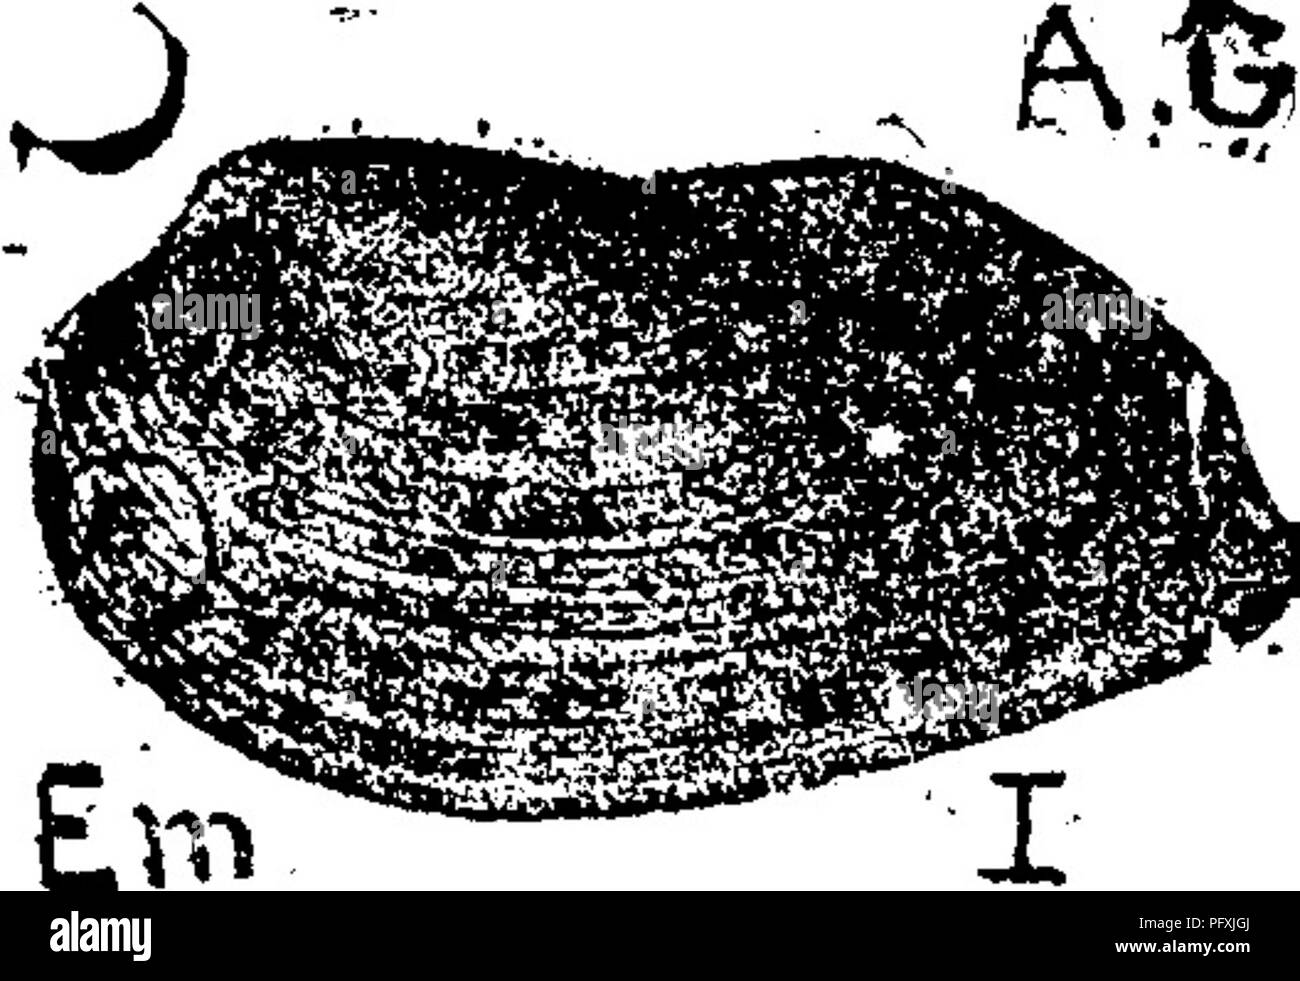 . A dictionary of the fossils of Pennsylvania and neighboring states named in the reports and catalogues of the survey ... Paleontology. o Cypricardia angusta. See Cypricardites angustus. Va. Cypricardia angustata. Modiomorpha angustata. IX. Cypricardia angustifrons, Modiolopsis modiolaris. III h. Cypricardia Gontracta. Cypricardites contractus. VIIIg. Cypricardia olsoleta. See Cypricardites obsoletus. F. Cypricardia orthonota. ( Unio orthonota.) Hall, Geology ^ of the Fourth district of New -i^^^^^^ York, 1843, page 48, figs. 6, 8, ^ t.j^i^ri^^G ^-^&quot;^^^^^^ 9, a cast. Medina, IV1). Cypric Stock Photo